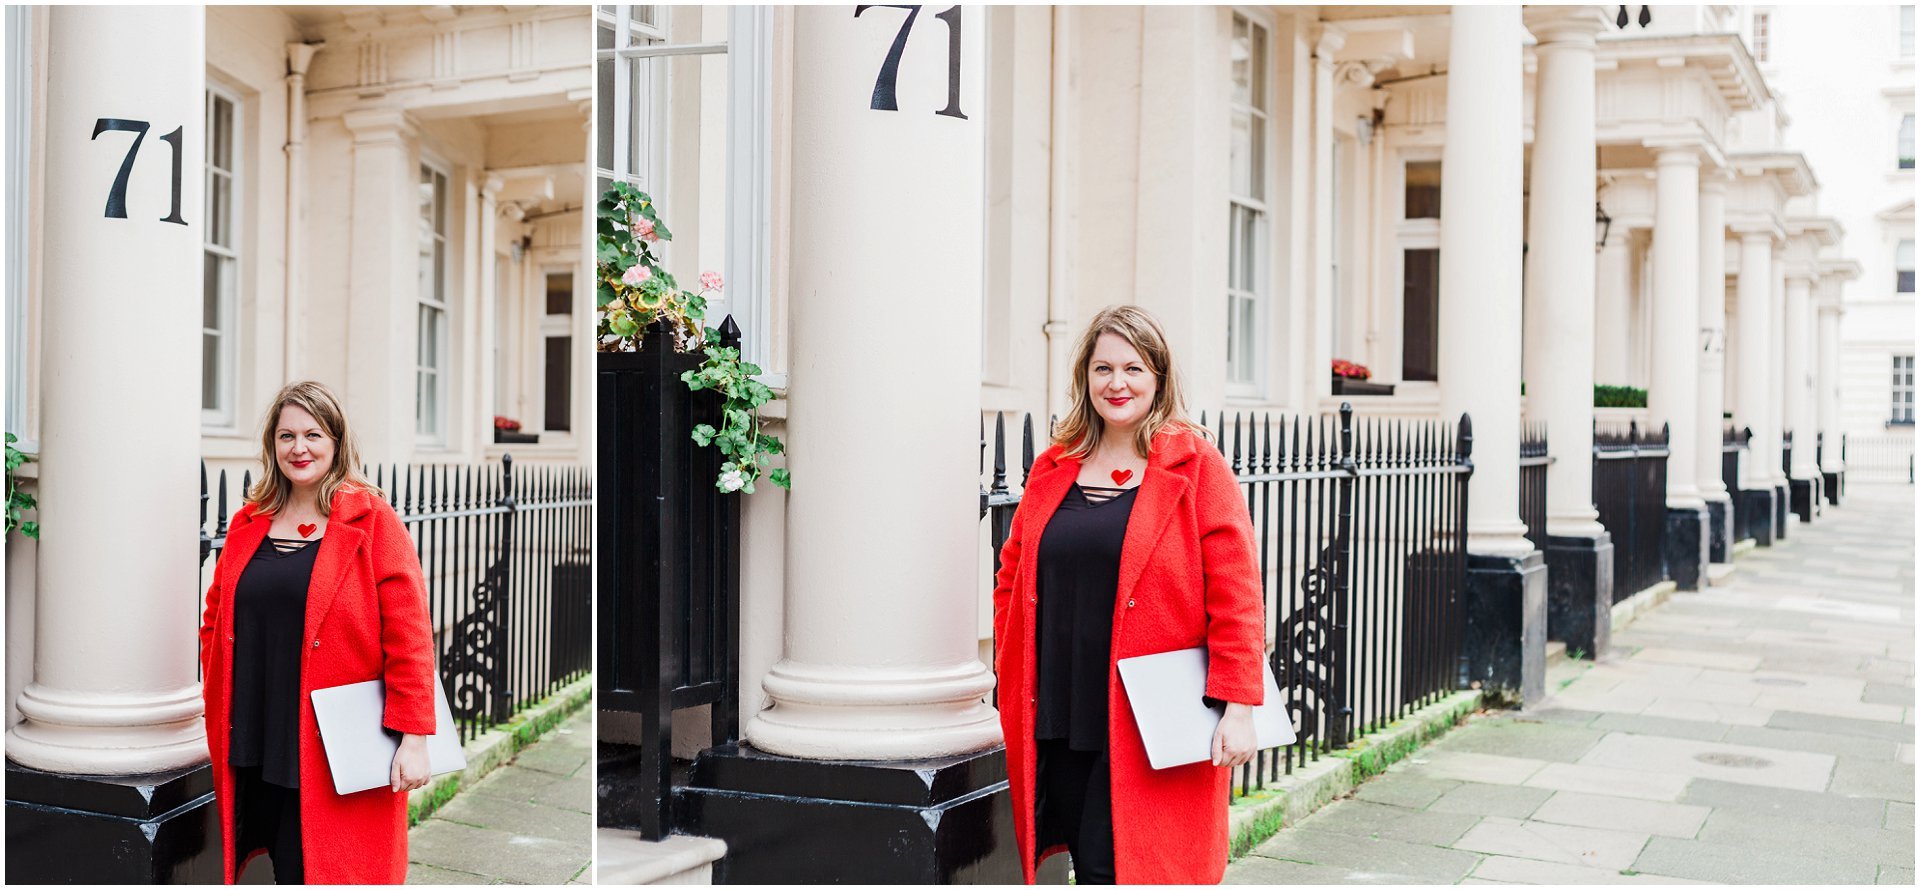 Belgravia London brand shoot with bright red umbrella for Claire Louise Branding. Images by London brand photographer AKP Branding Stories